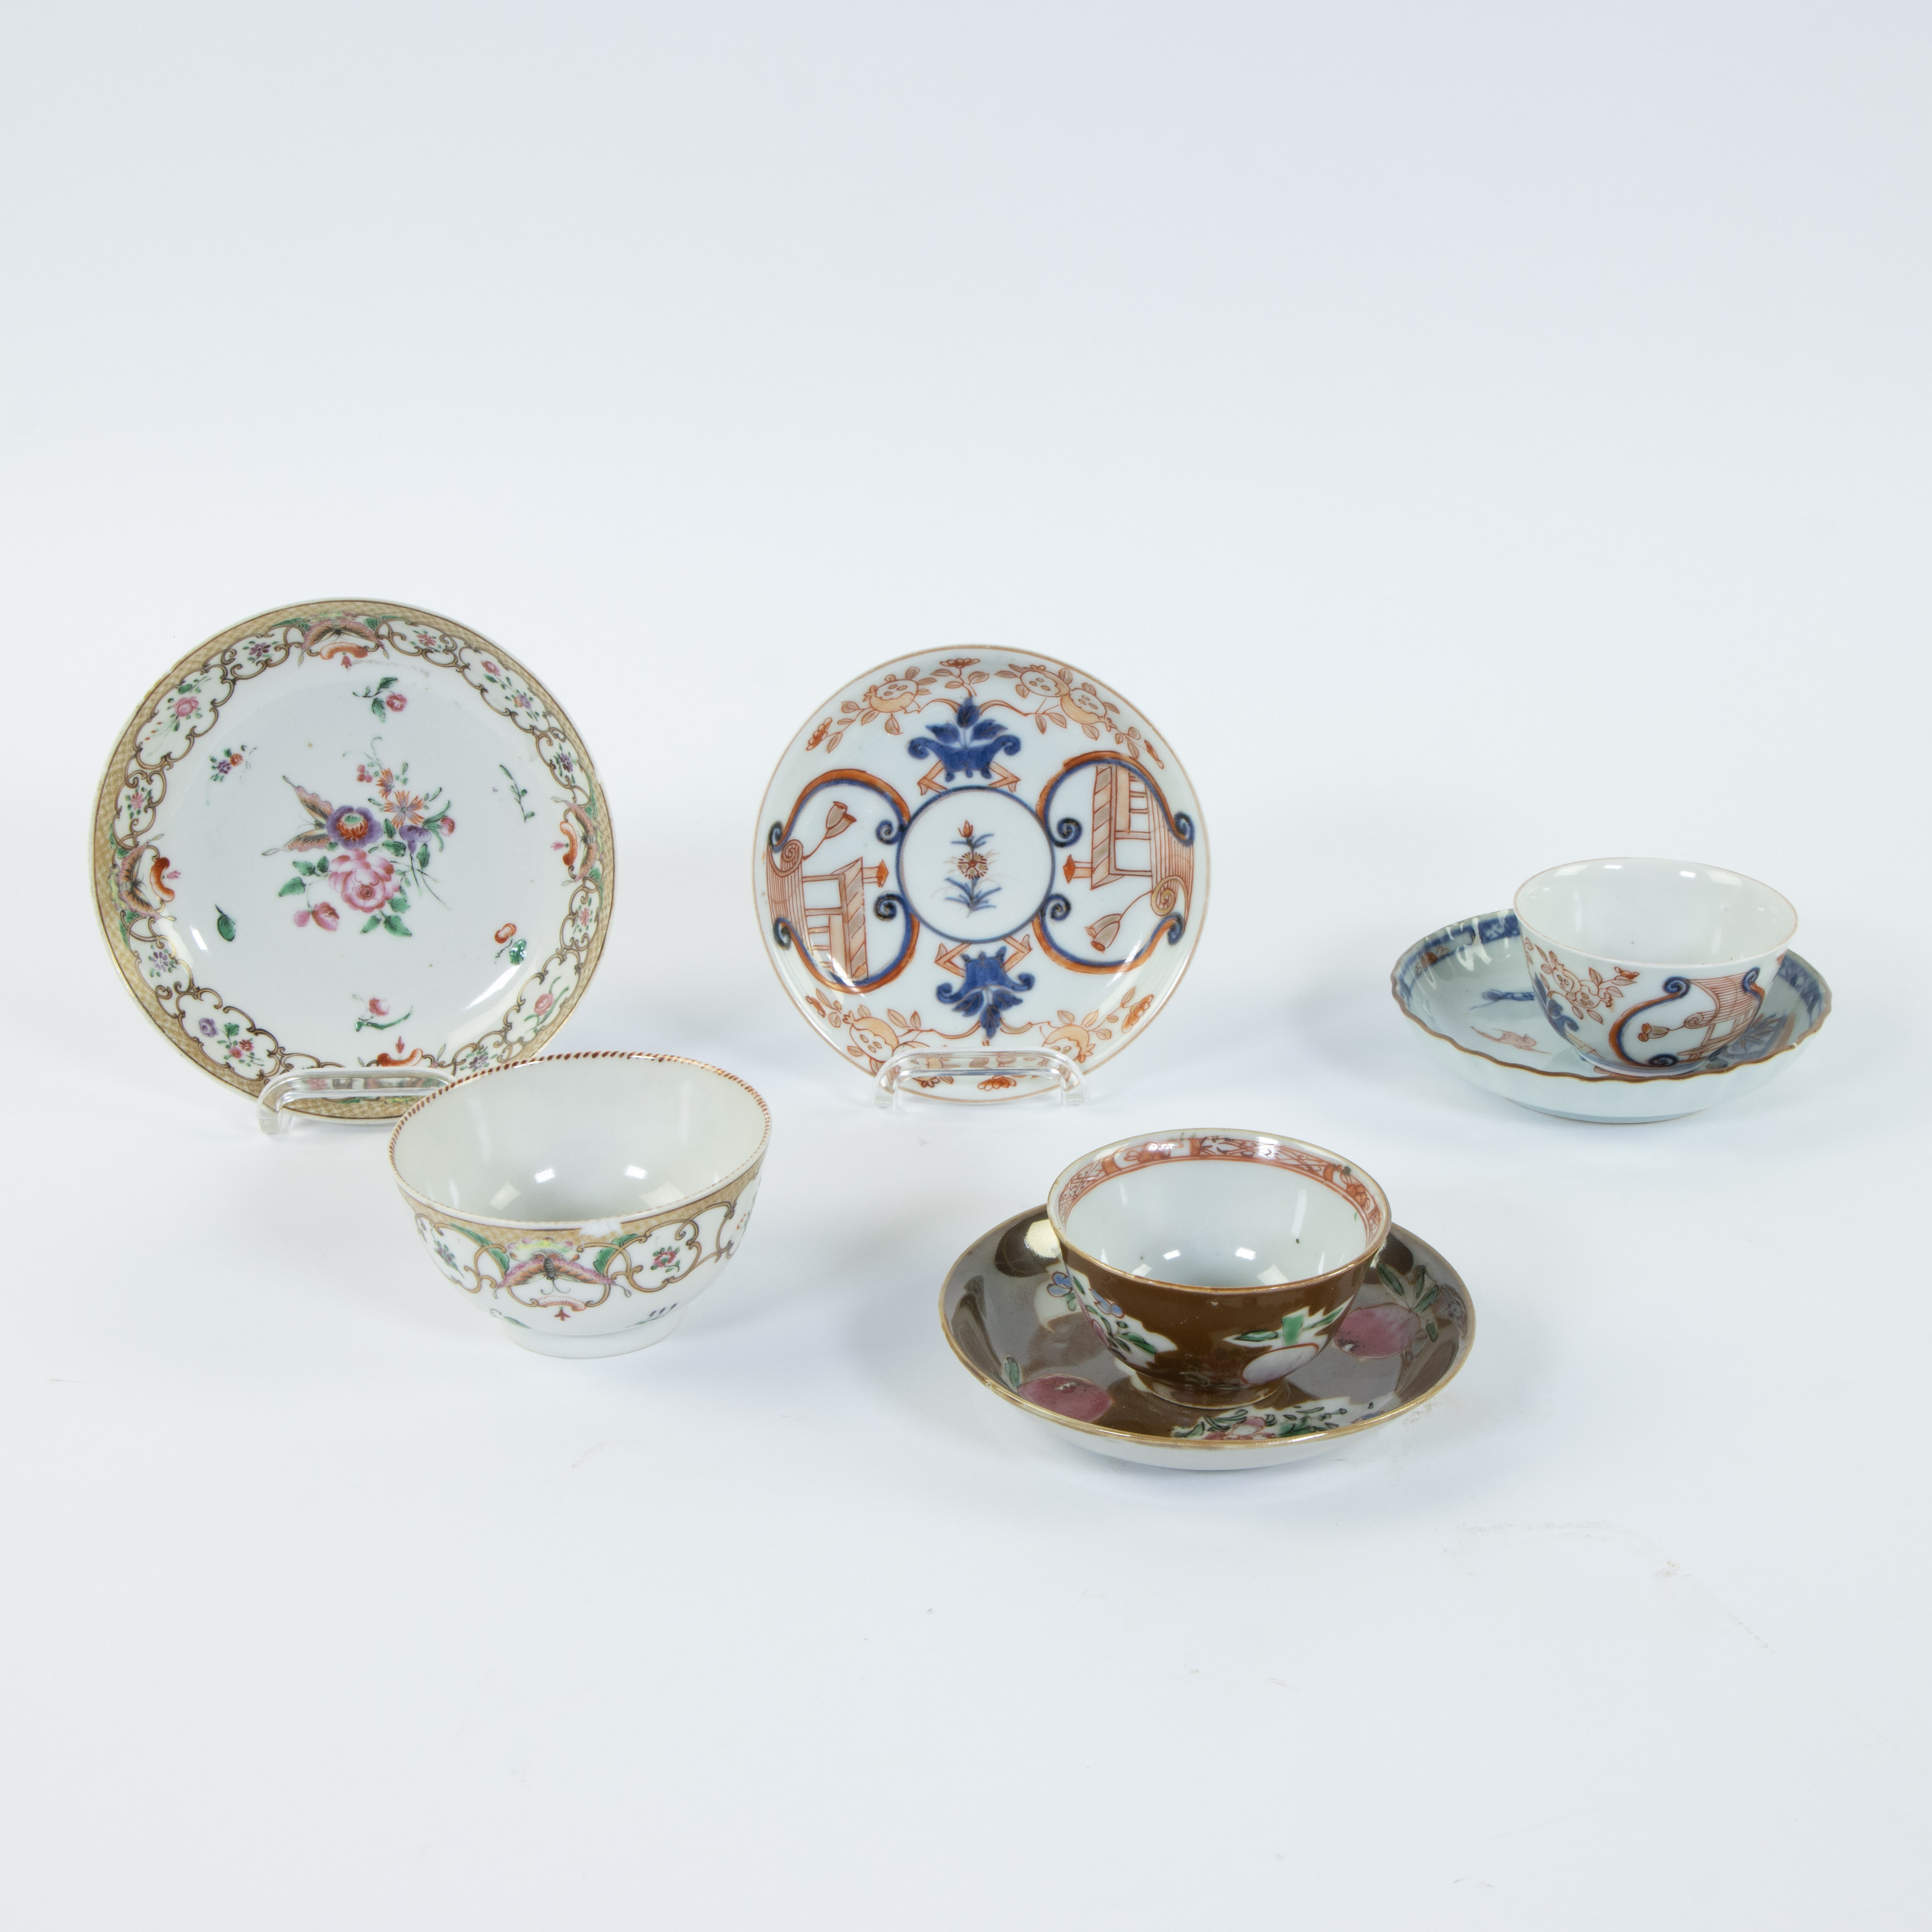 Collection of Chinese porcelain 18th/19th century, famille rose, Imari